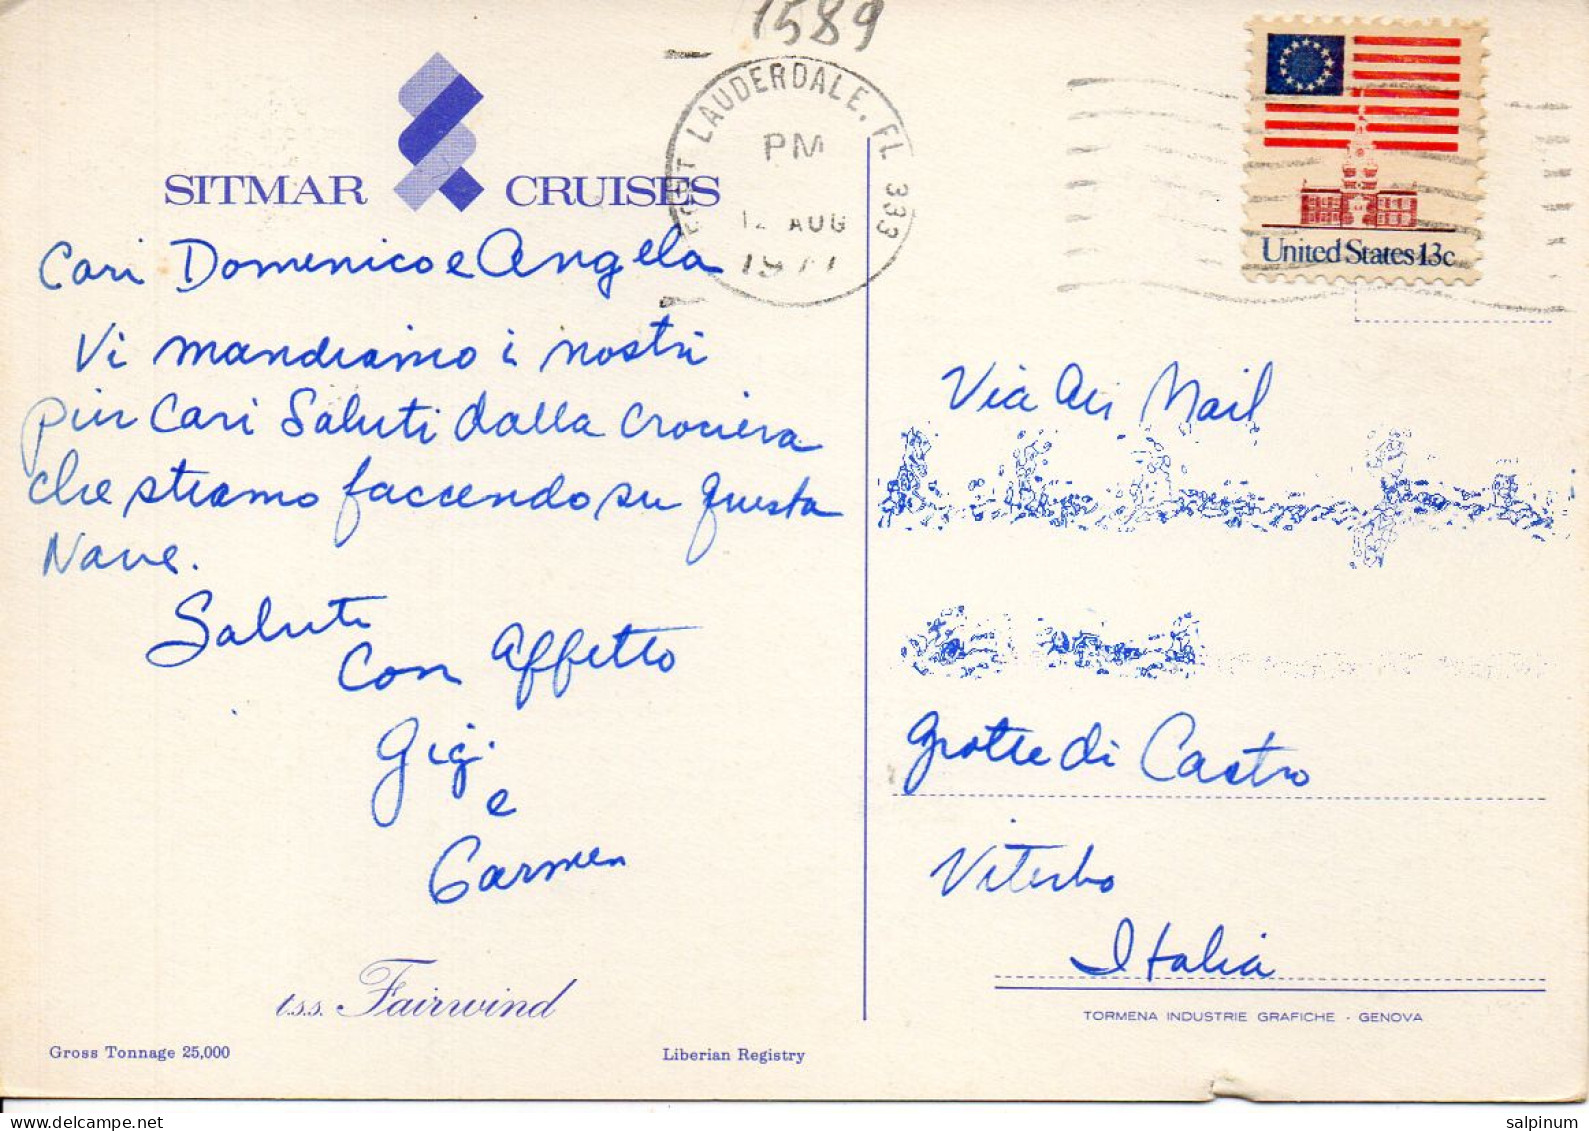 Philatelic Postcard With Stamps Sent From UNITED STATES OF AMERICA To ITALY - Storia Postale